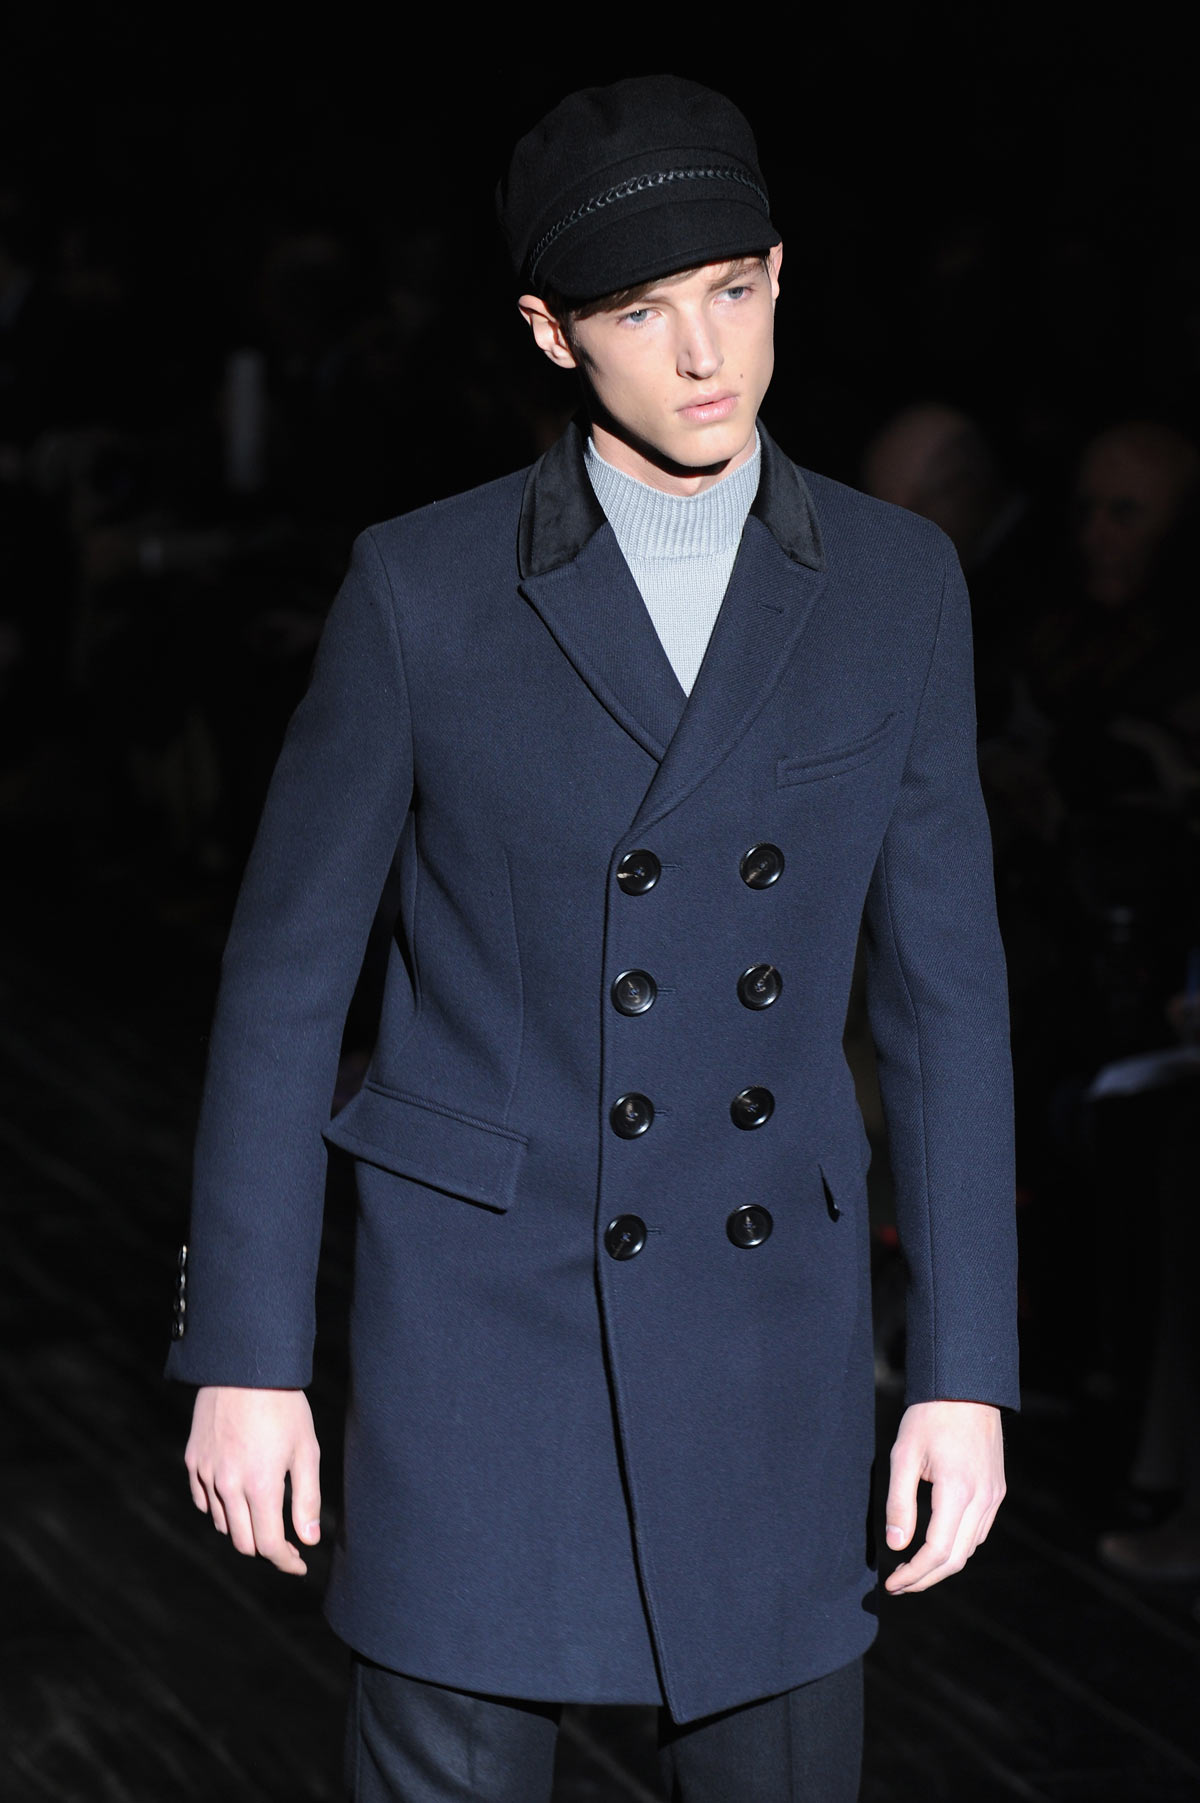 A model walks the runway during the Gucci show as a part of Milan Fashion Week Menswear Autumn/Winter 2014 on January 13, 2014 in Milan, Italy.